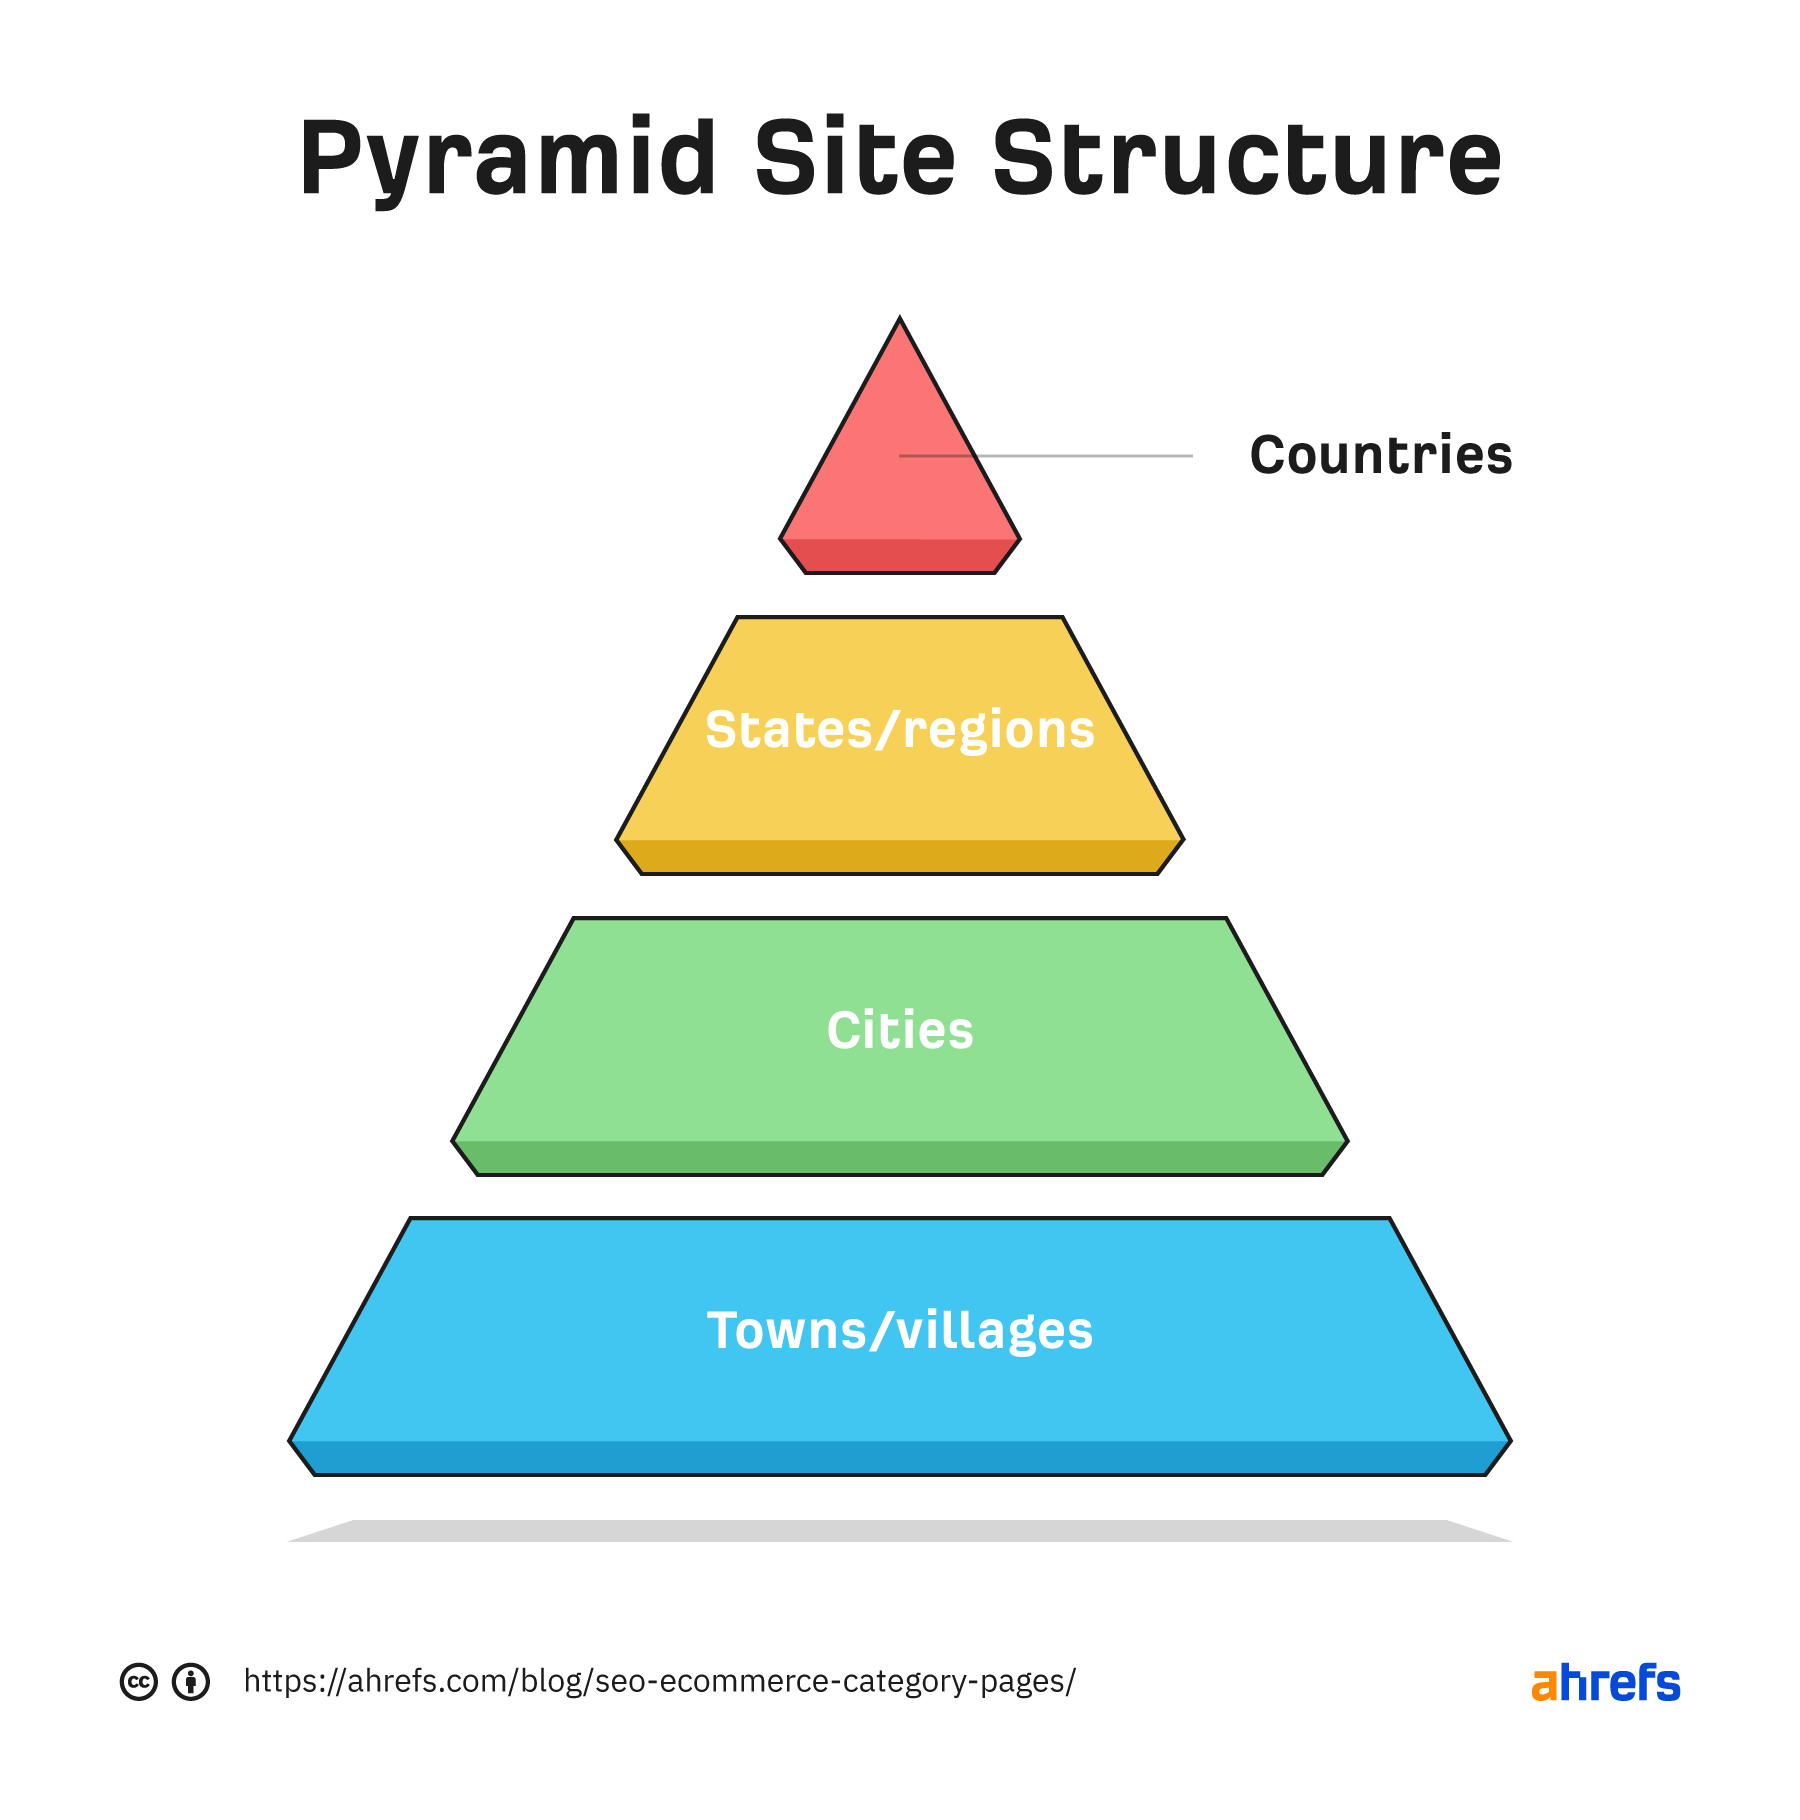 Pyramid site structure